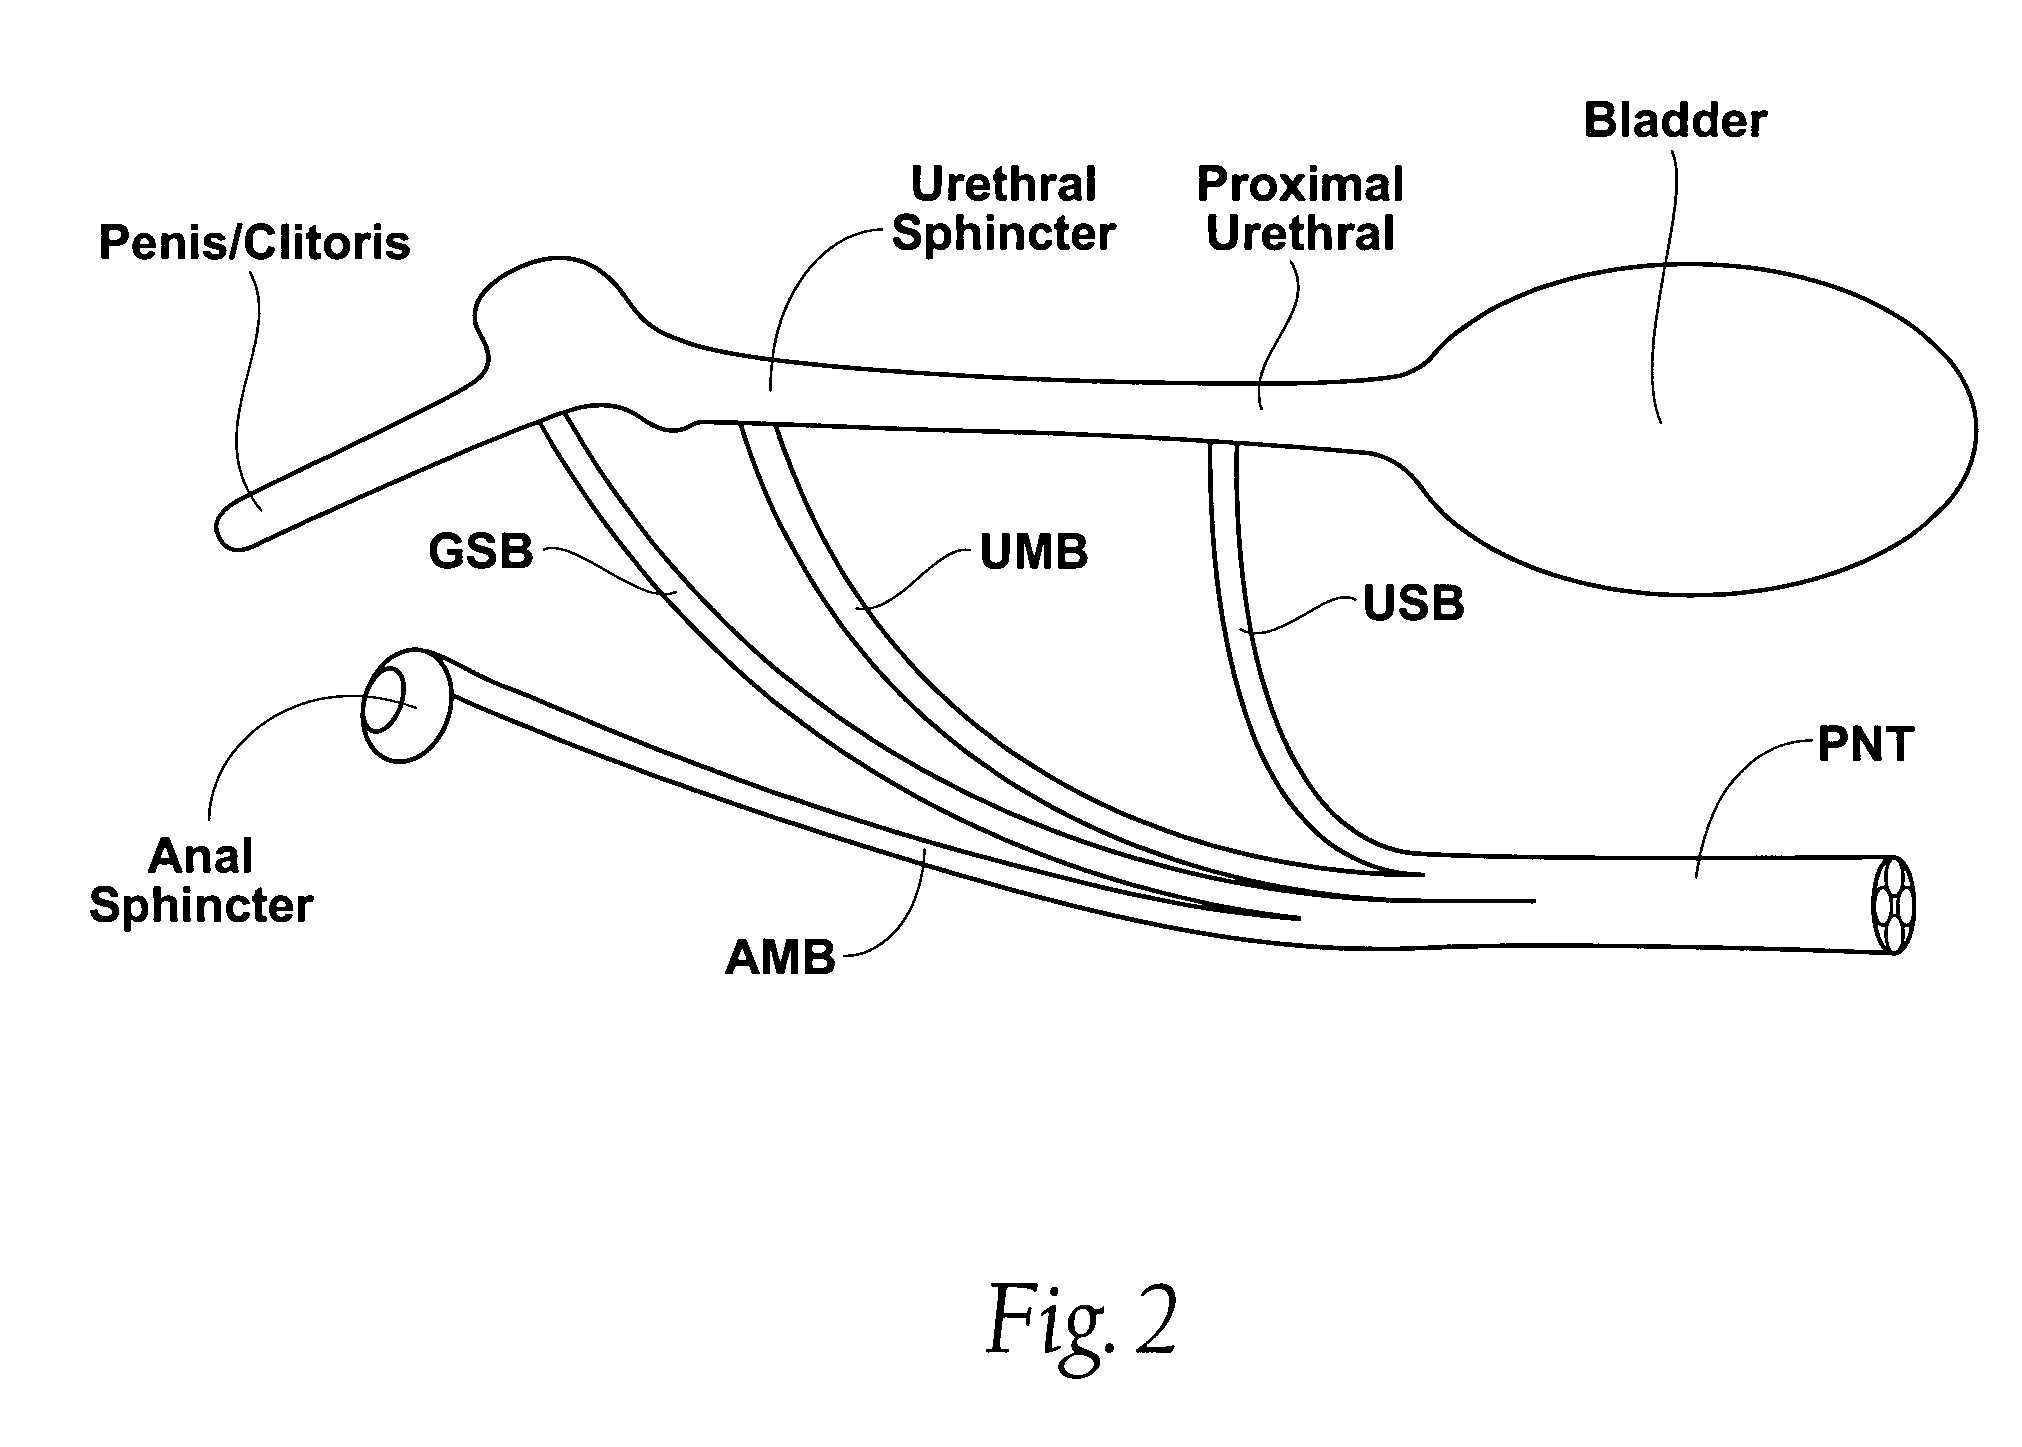 Methods for stimulating components in, on, or near the pudendal nerve or its branches to achieve selective physiologic responses